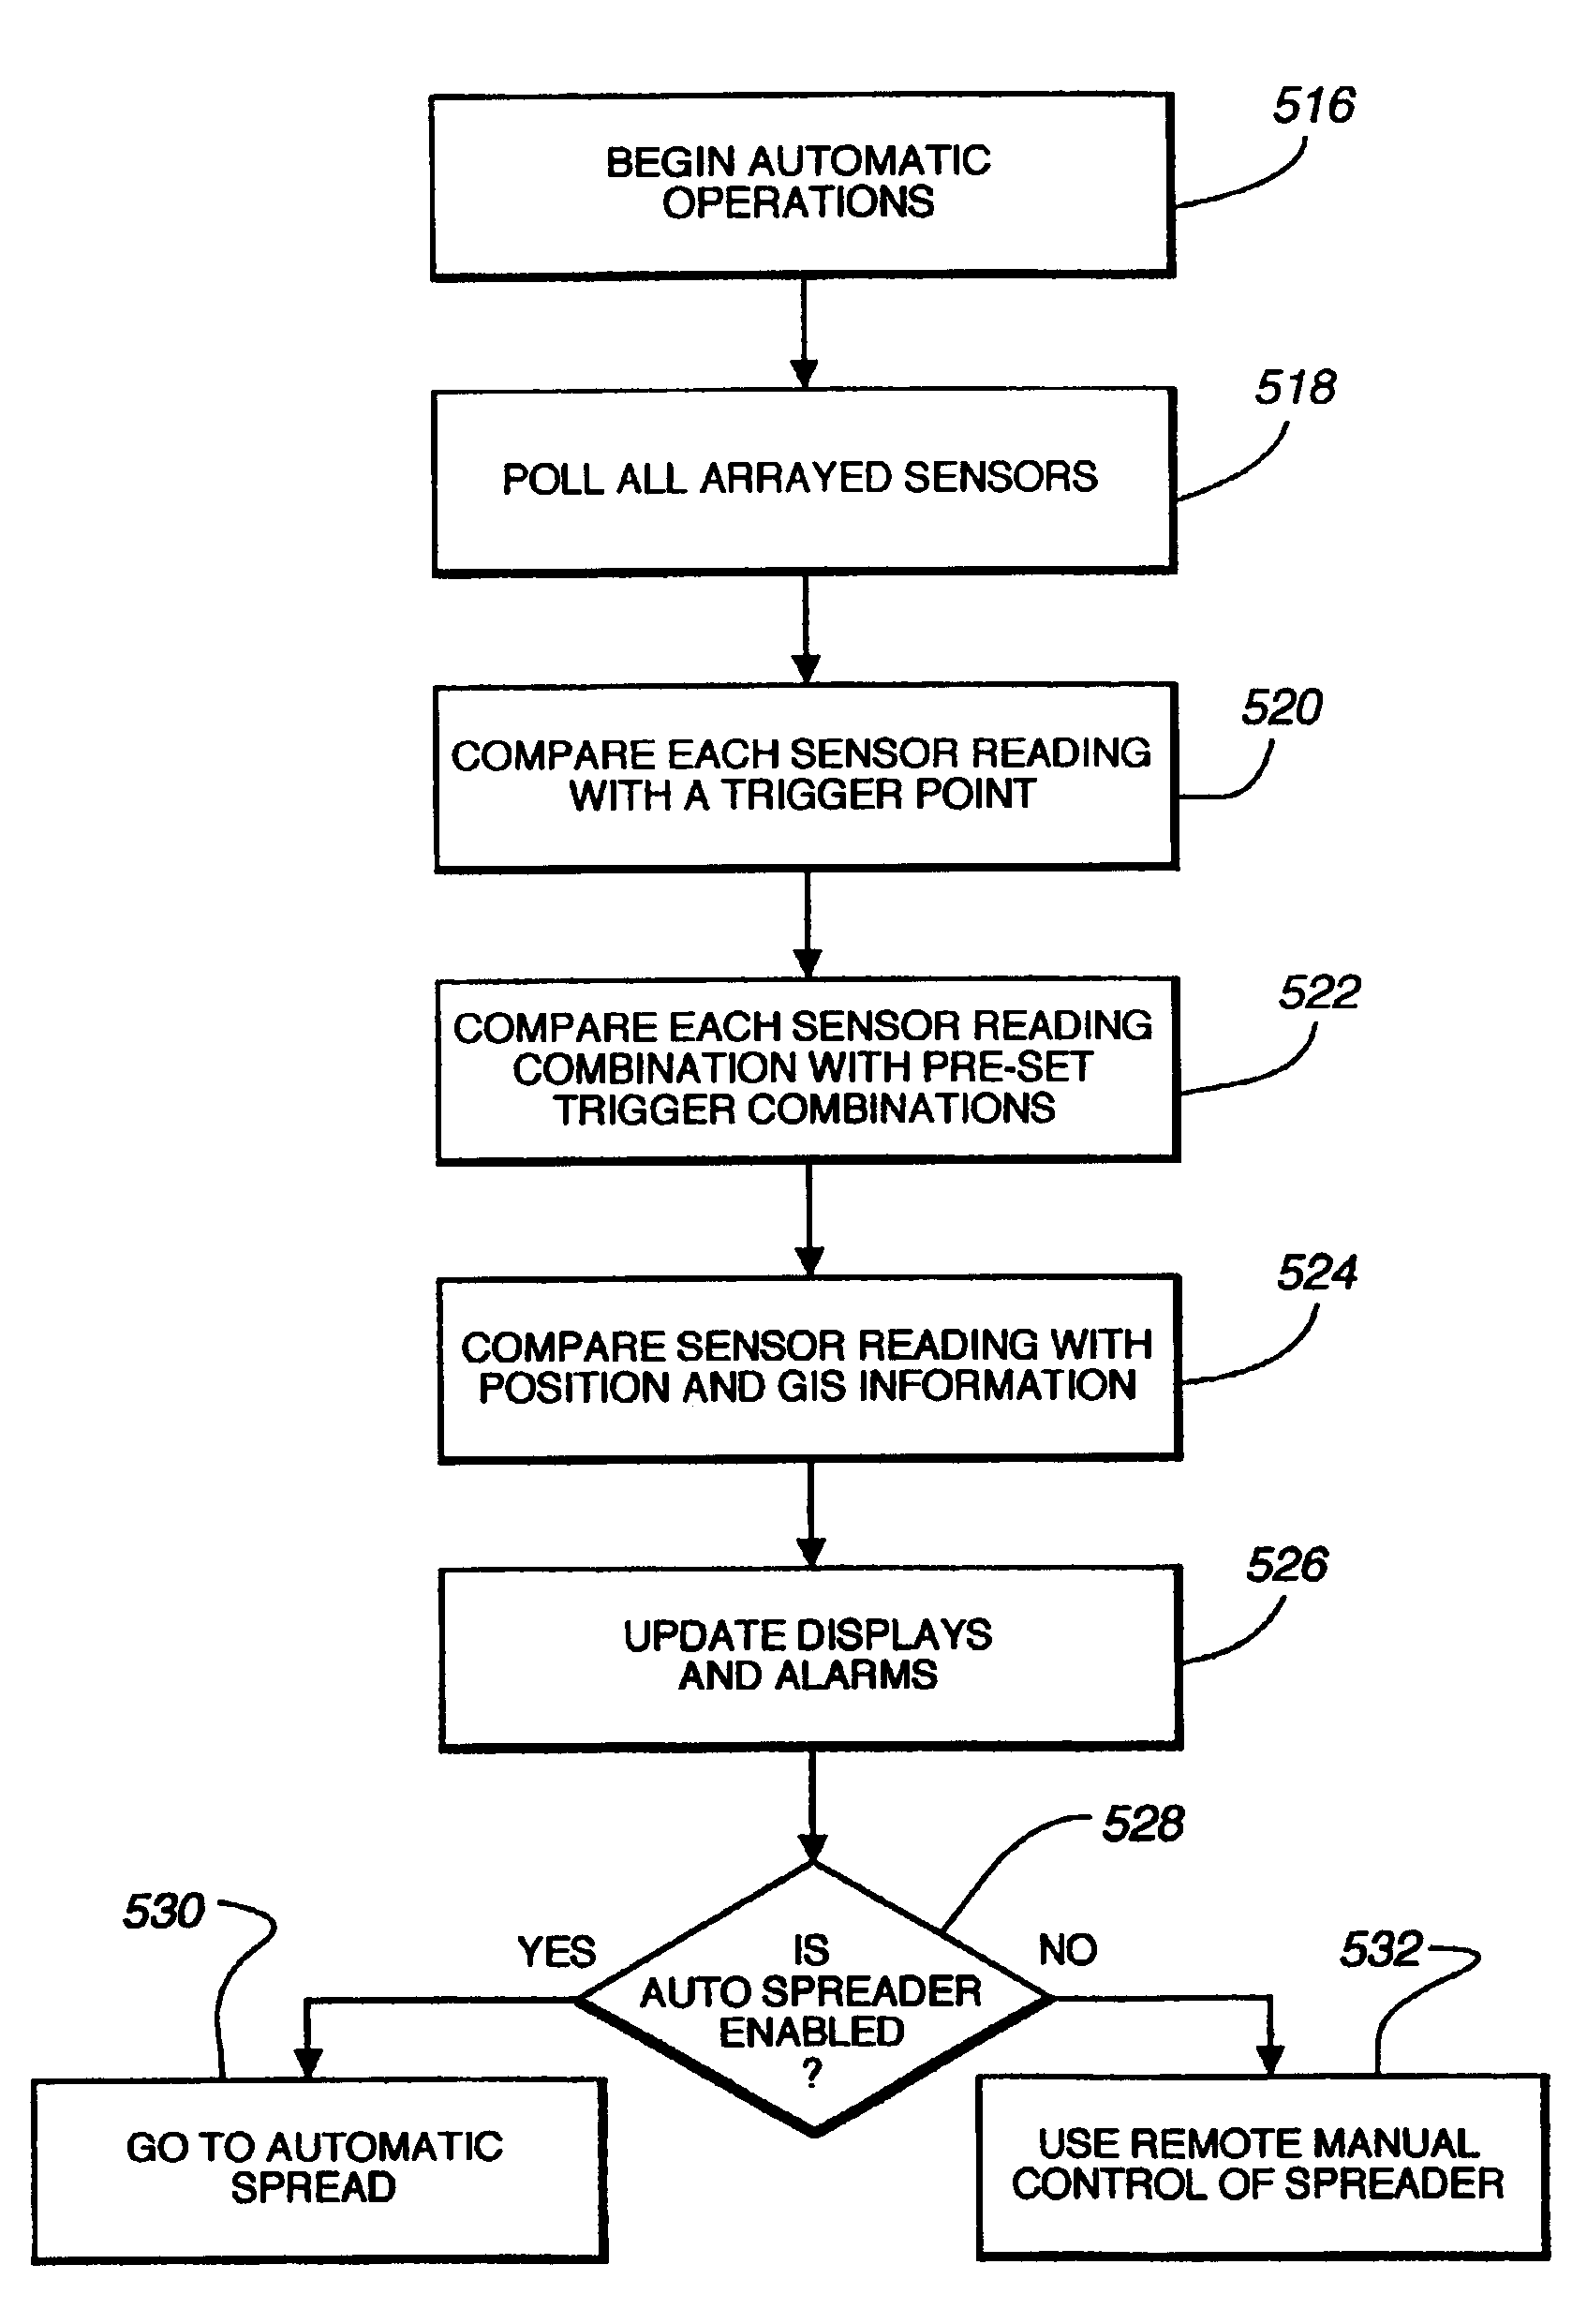 Vehicle mounted travel surface and weather condition monitoring system